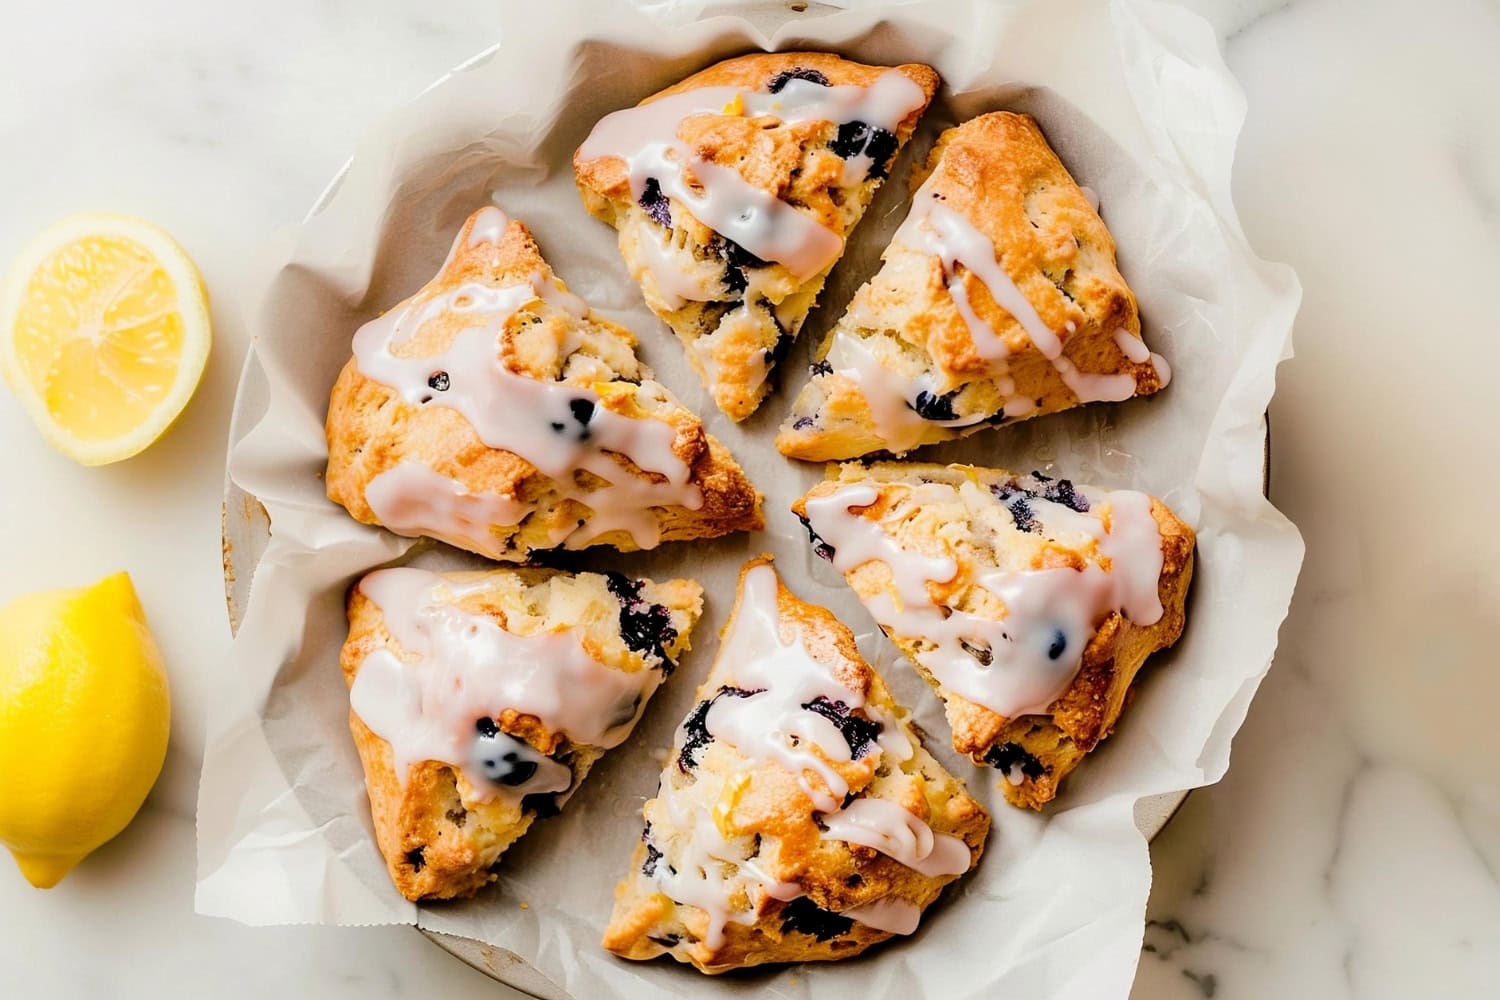 Moist and flavorful Lemon Blueberry Scones with glaze, overhead view.